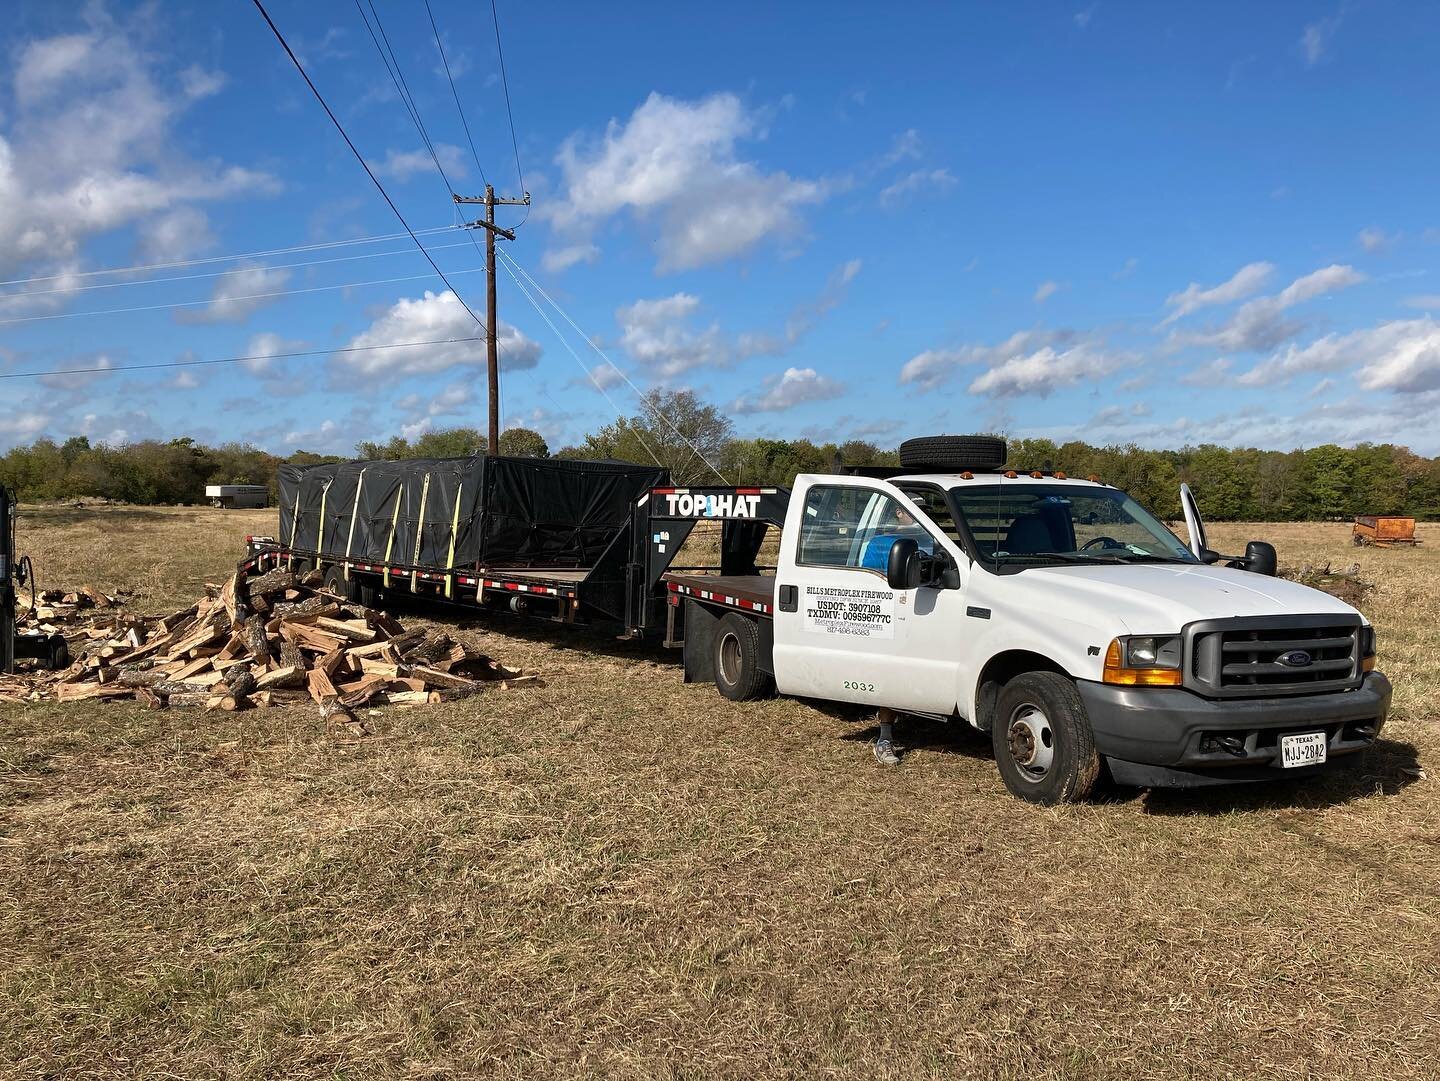 Day in the life. 5.5cds of 20&rdquo; Oak picked up and unloaded. Ready for another load tomorrow. Big delivery week. #firewood #fall #texas